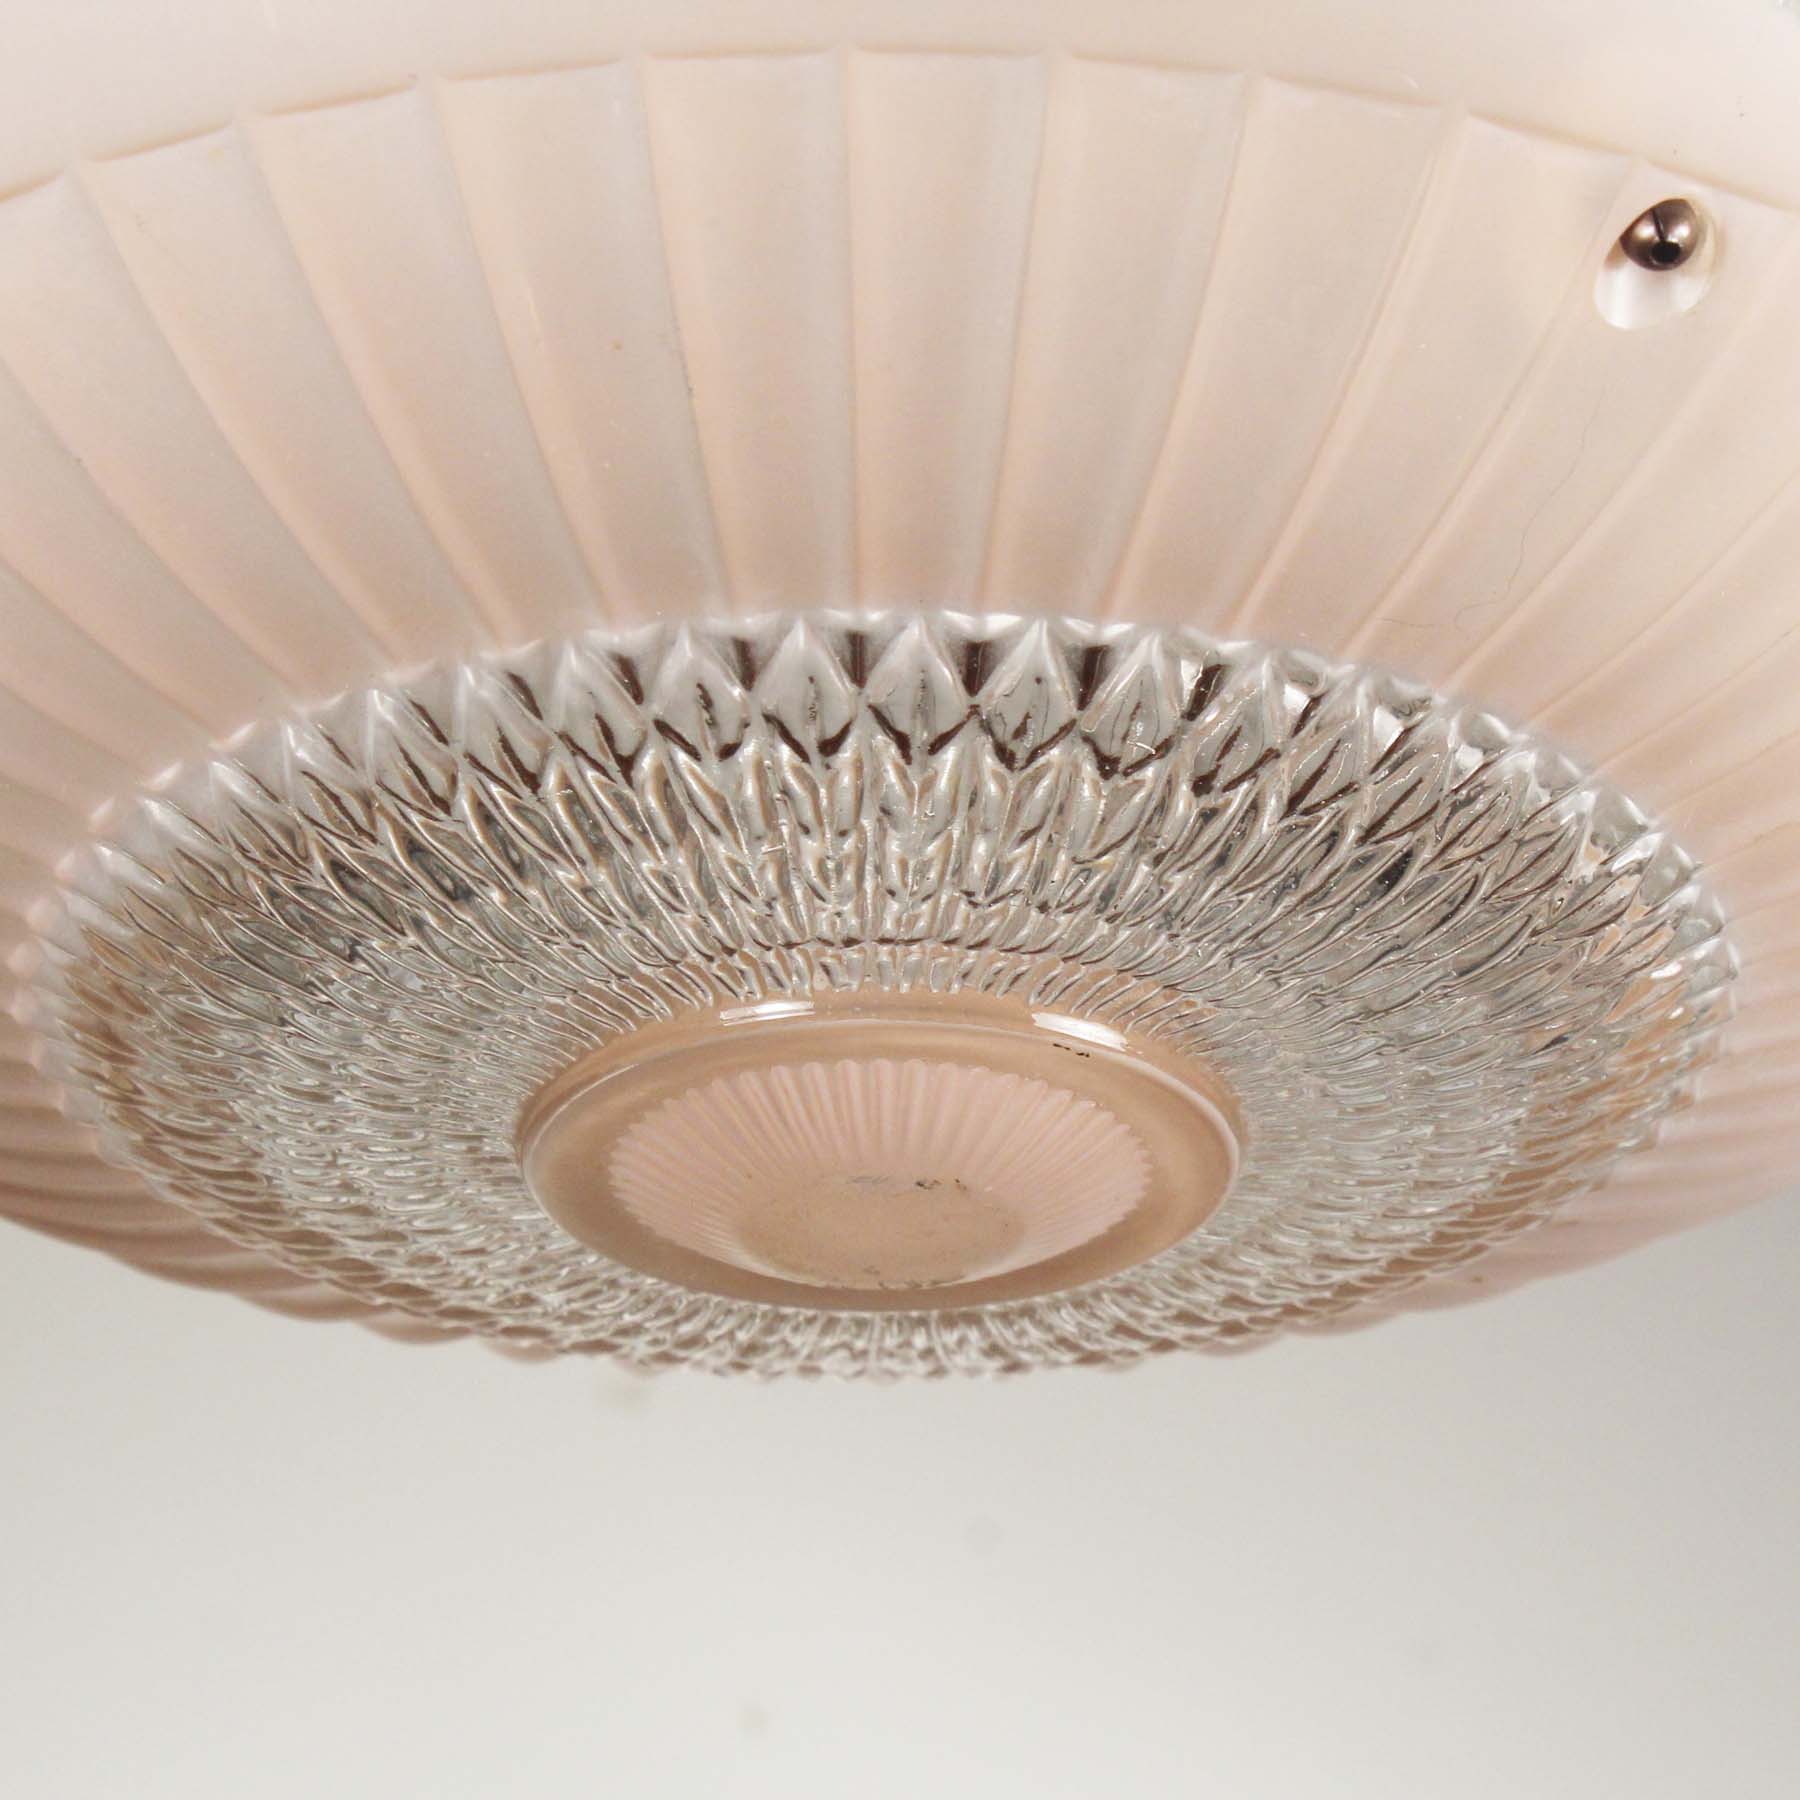 SOLD Vintage Flush Mount Light Fixture with Pale Pink Glass Shade, c.1940-67784